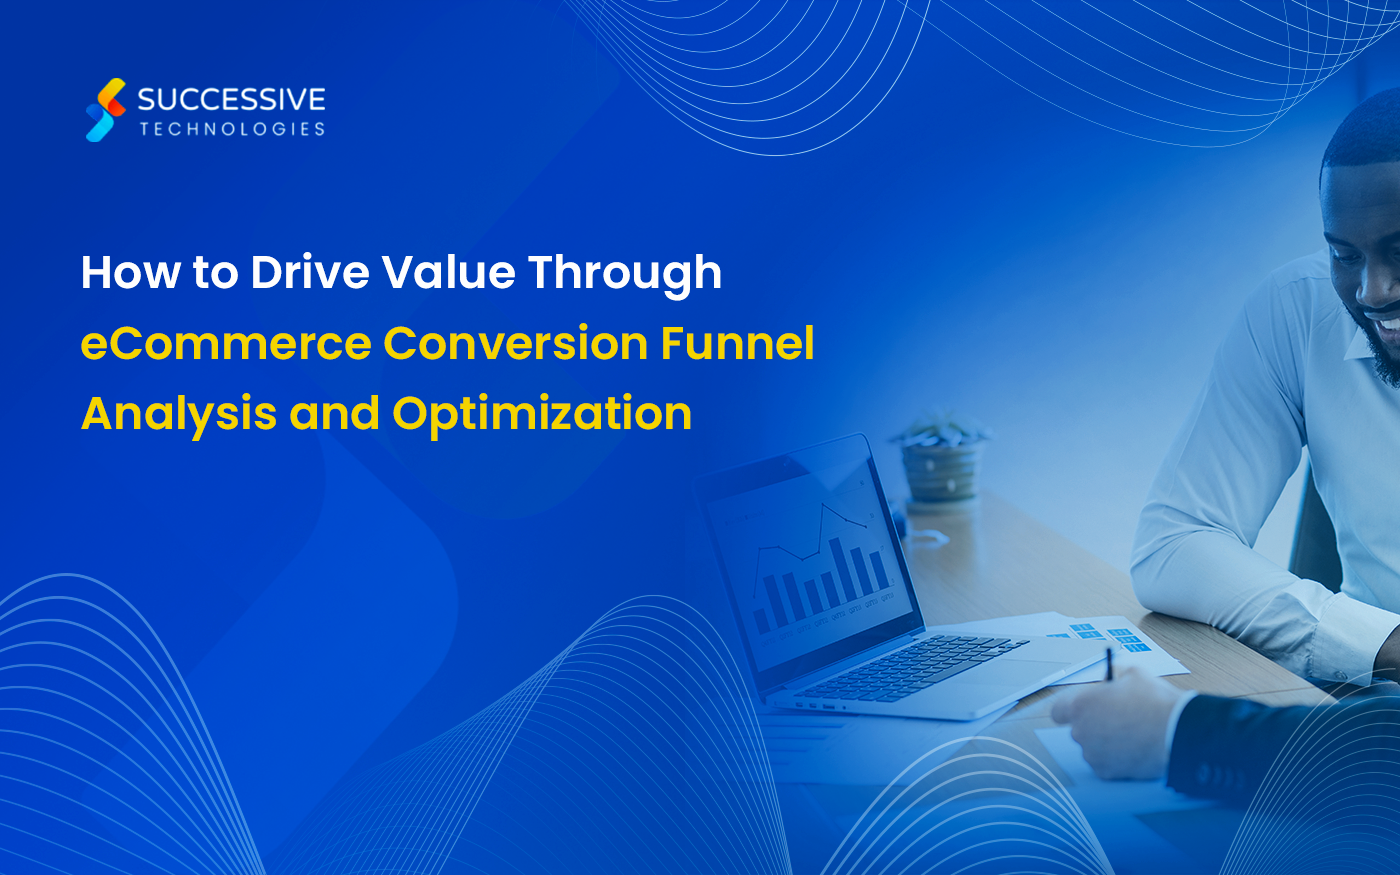 How to Drive Value Through eCommerce Conversion Funnel Analysis and Optimization